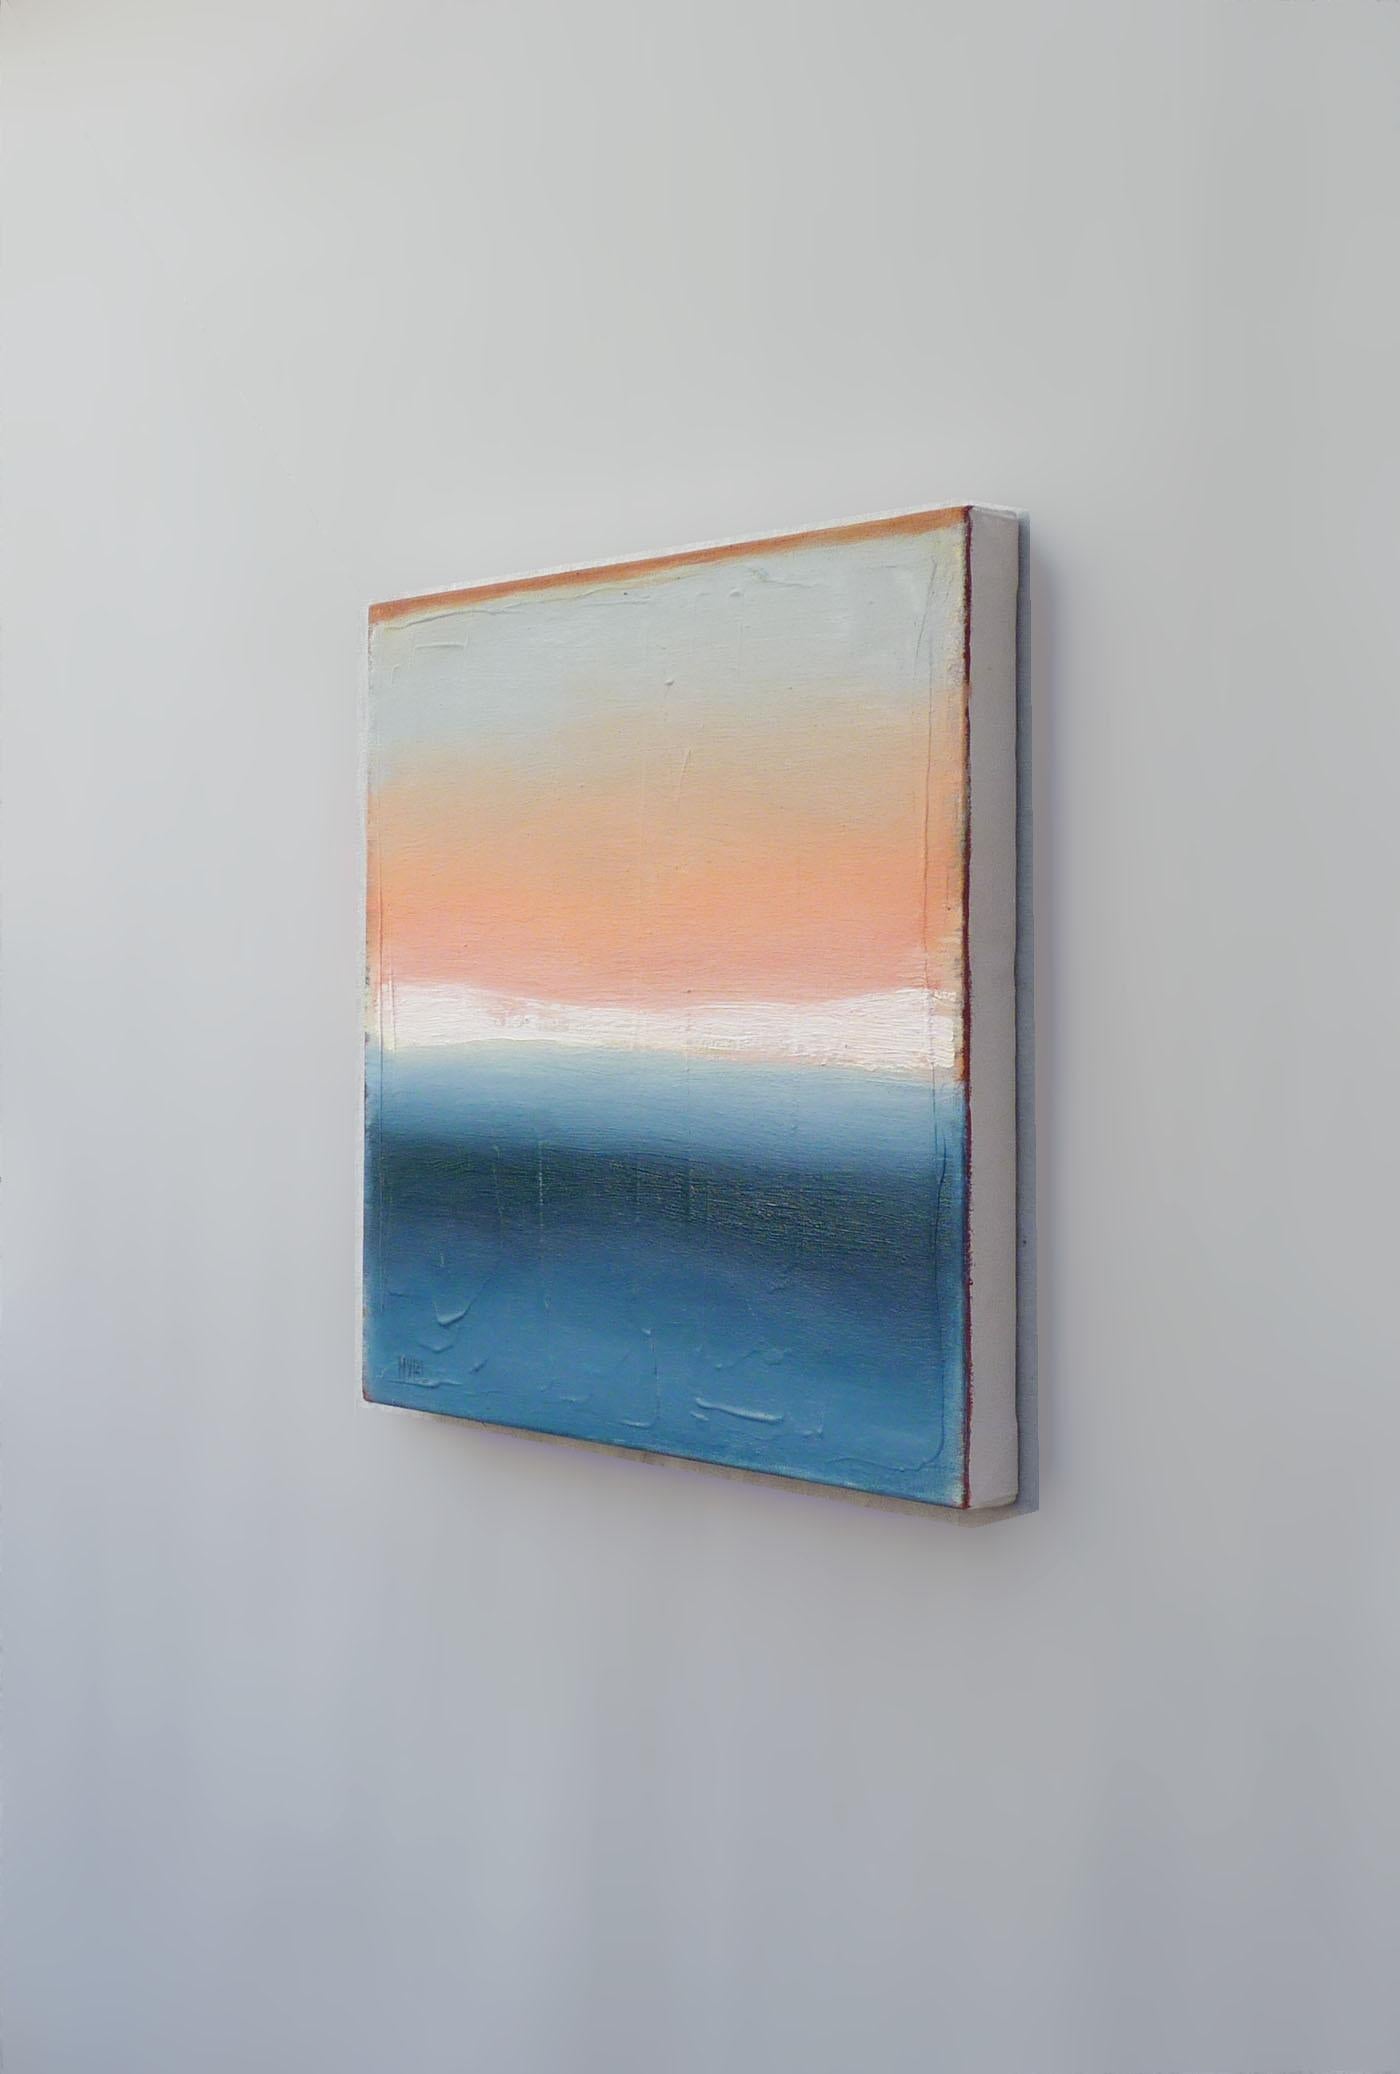 <p>Artist Comments<br>Artist Heidi Hybl portrays an abstract seascape where the orange-painted sky, soft white mist, and tranquil blue ocean seamlessly blend into one dreamy composition. 